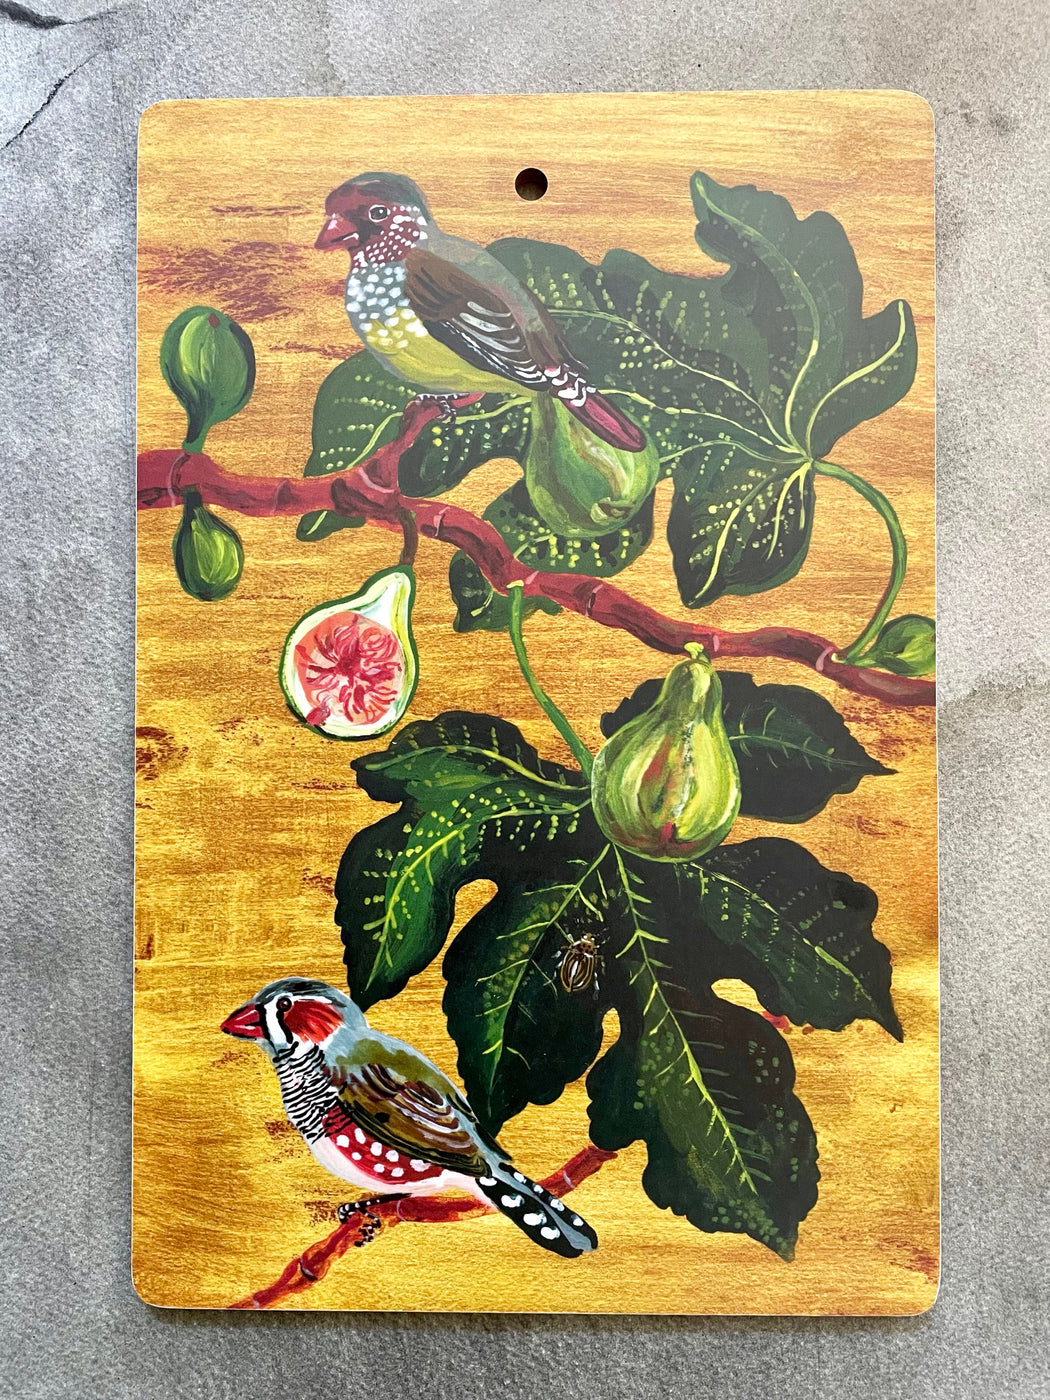 Nathalie Lete "In the Fig Tree" Cutting Board